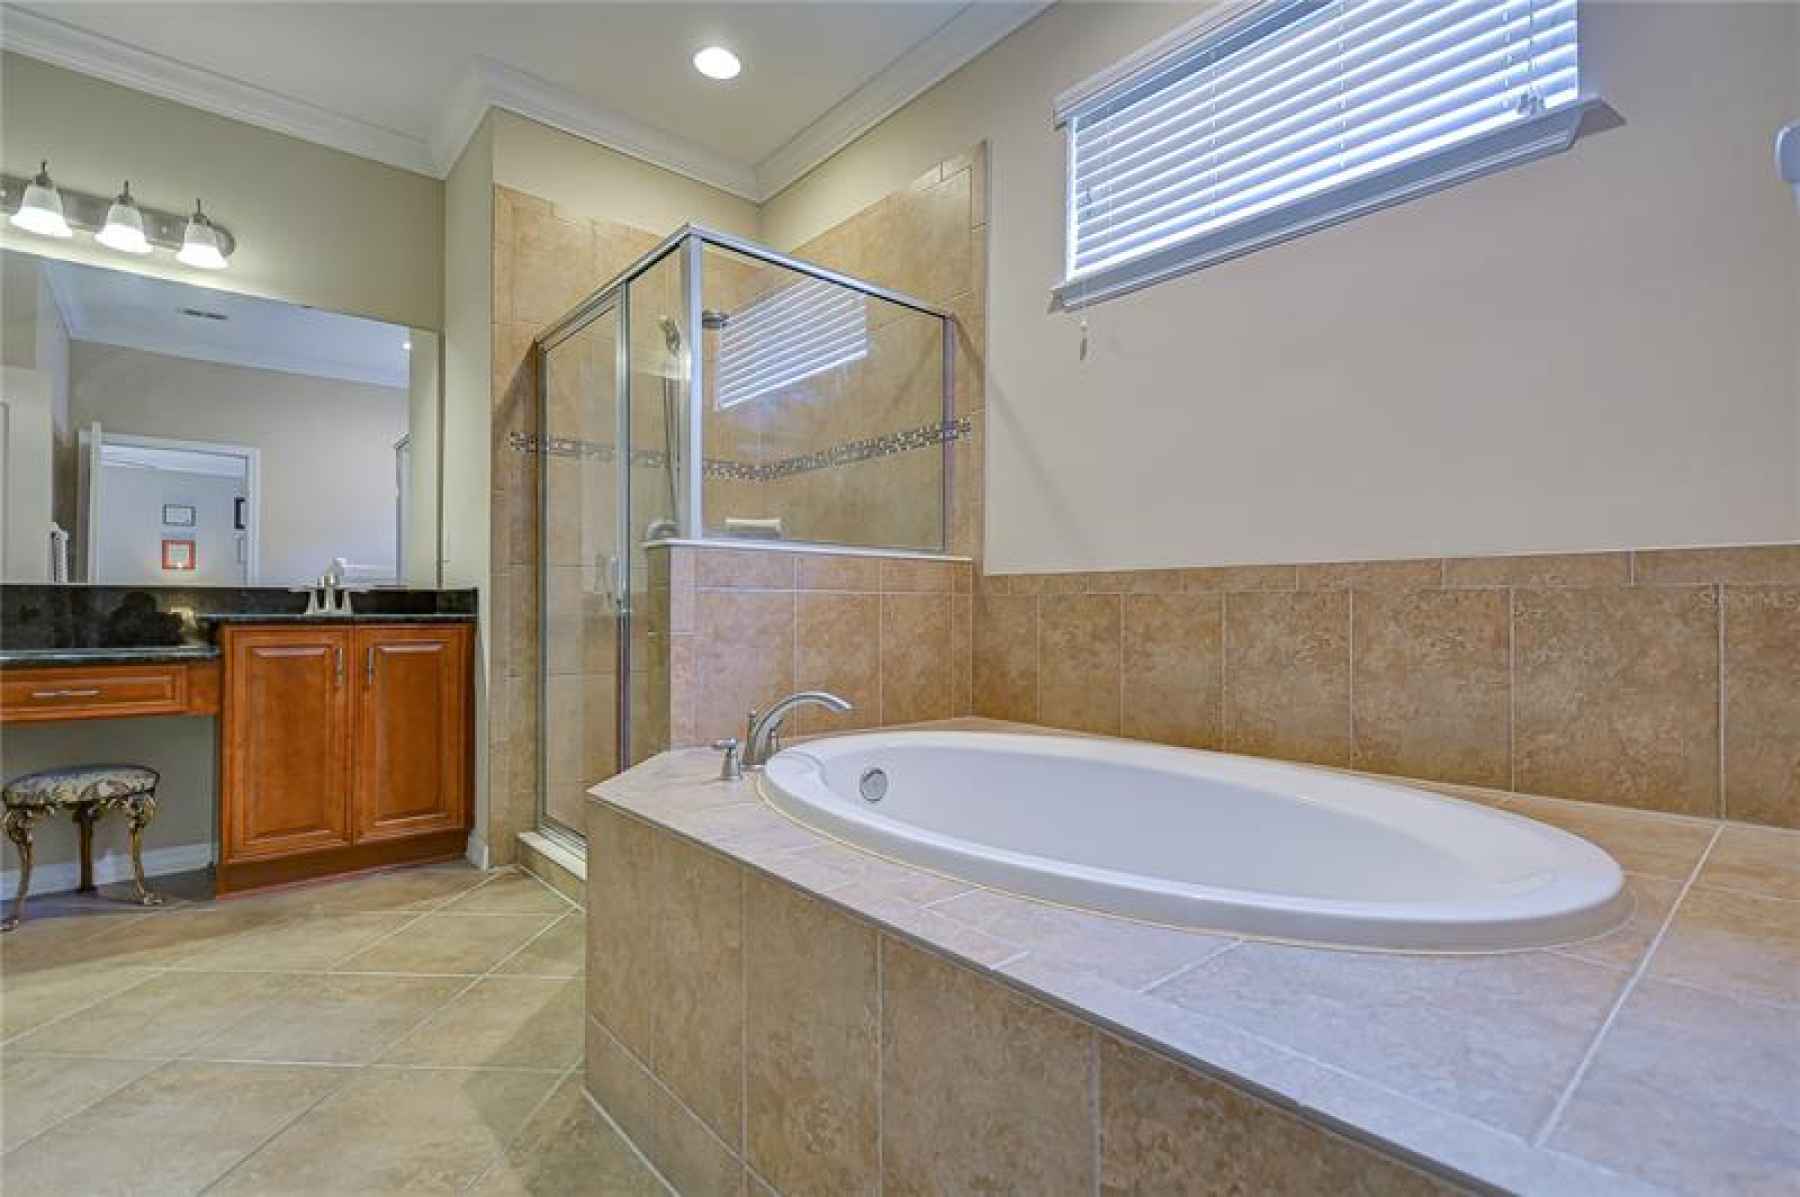 Soaking tub separate from walk in shower!